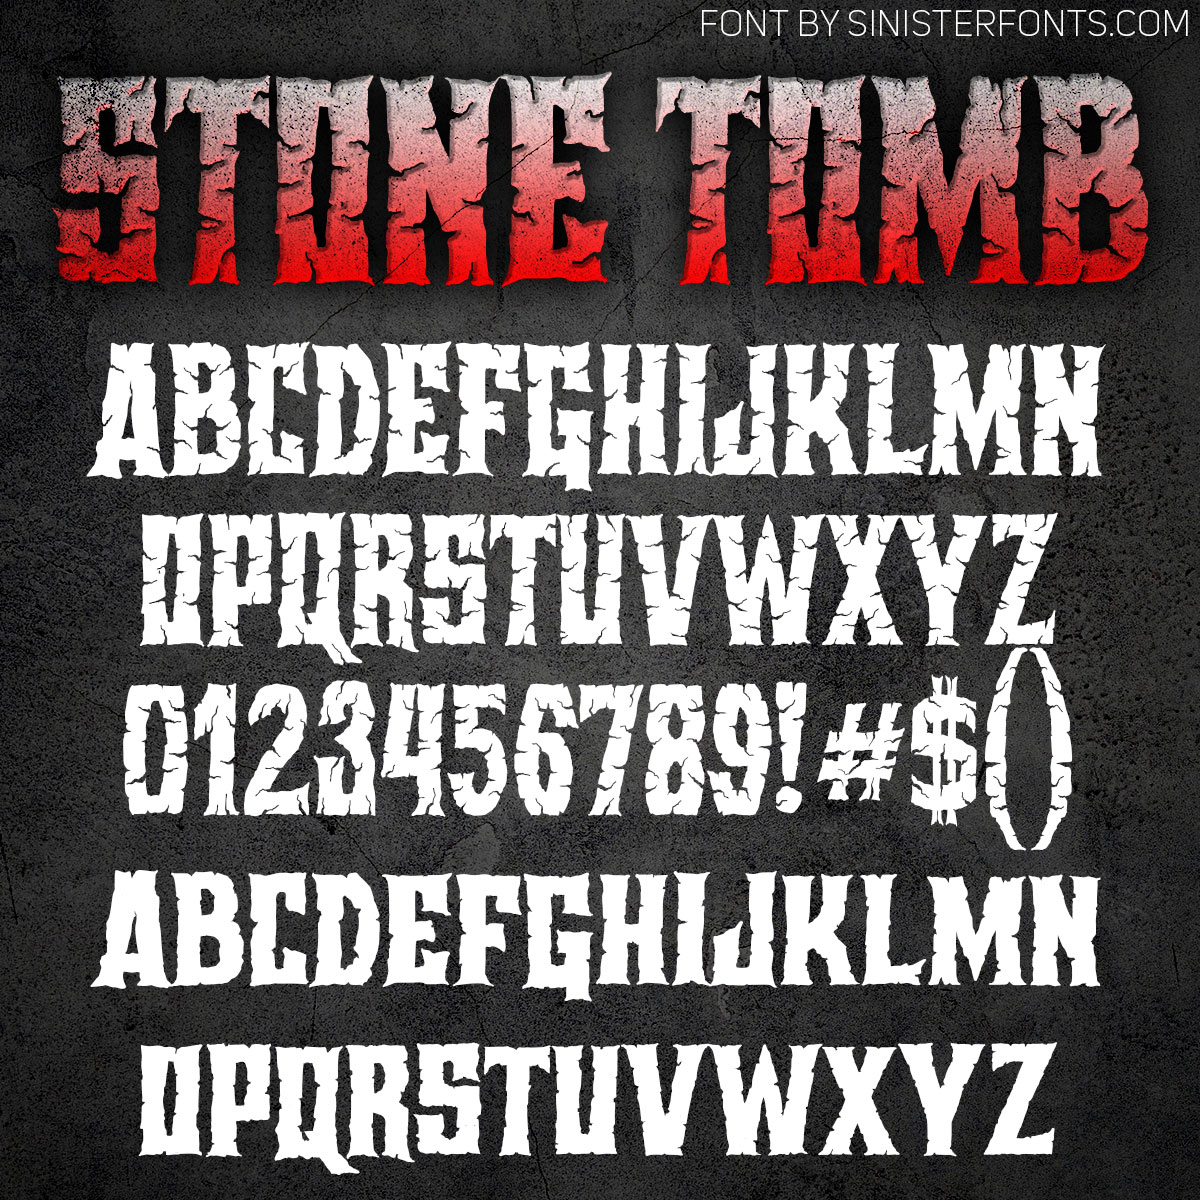 Sinister Fonts: Chad Savage's free, original horror, scary and